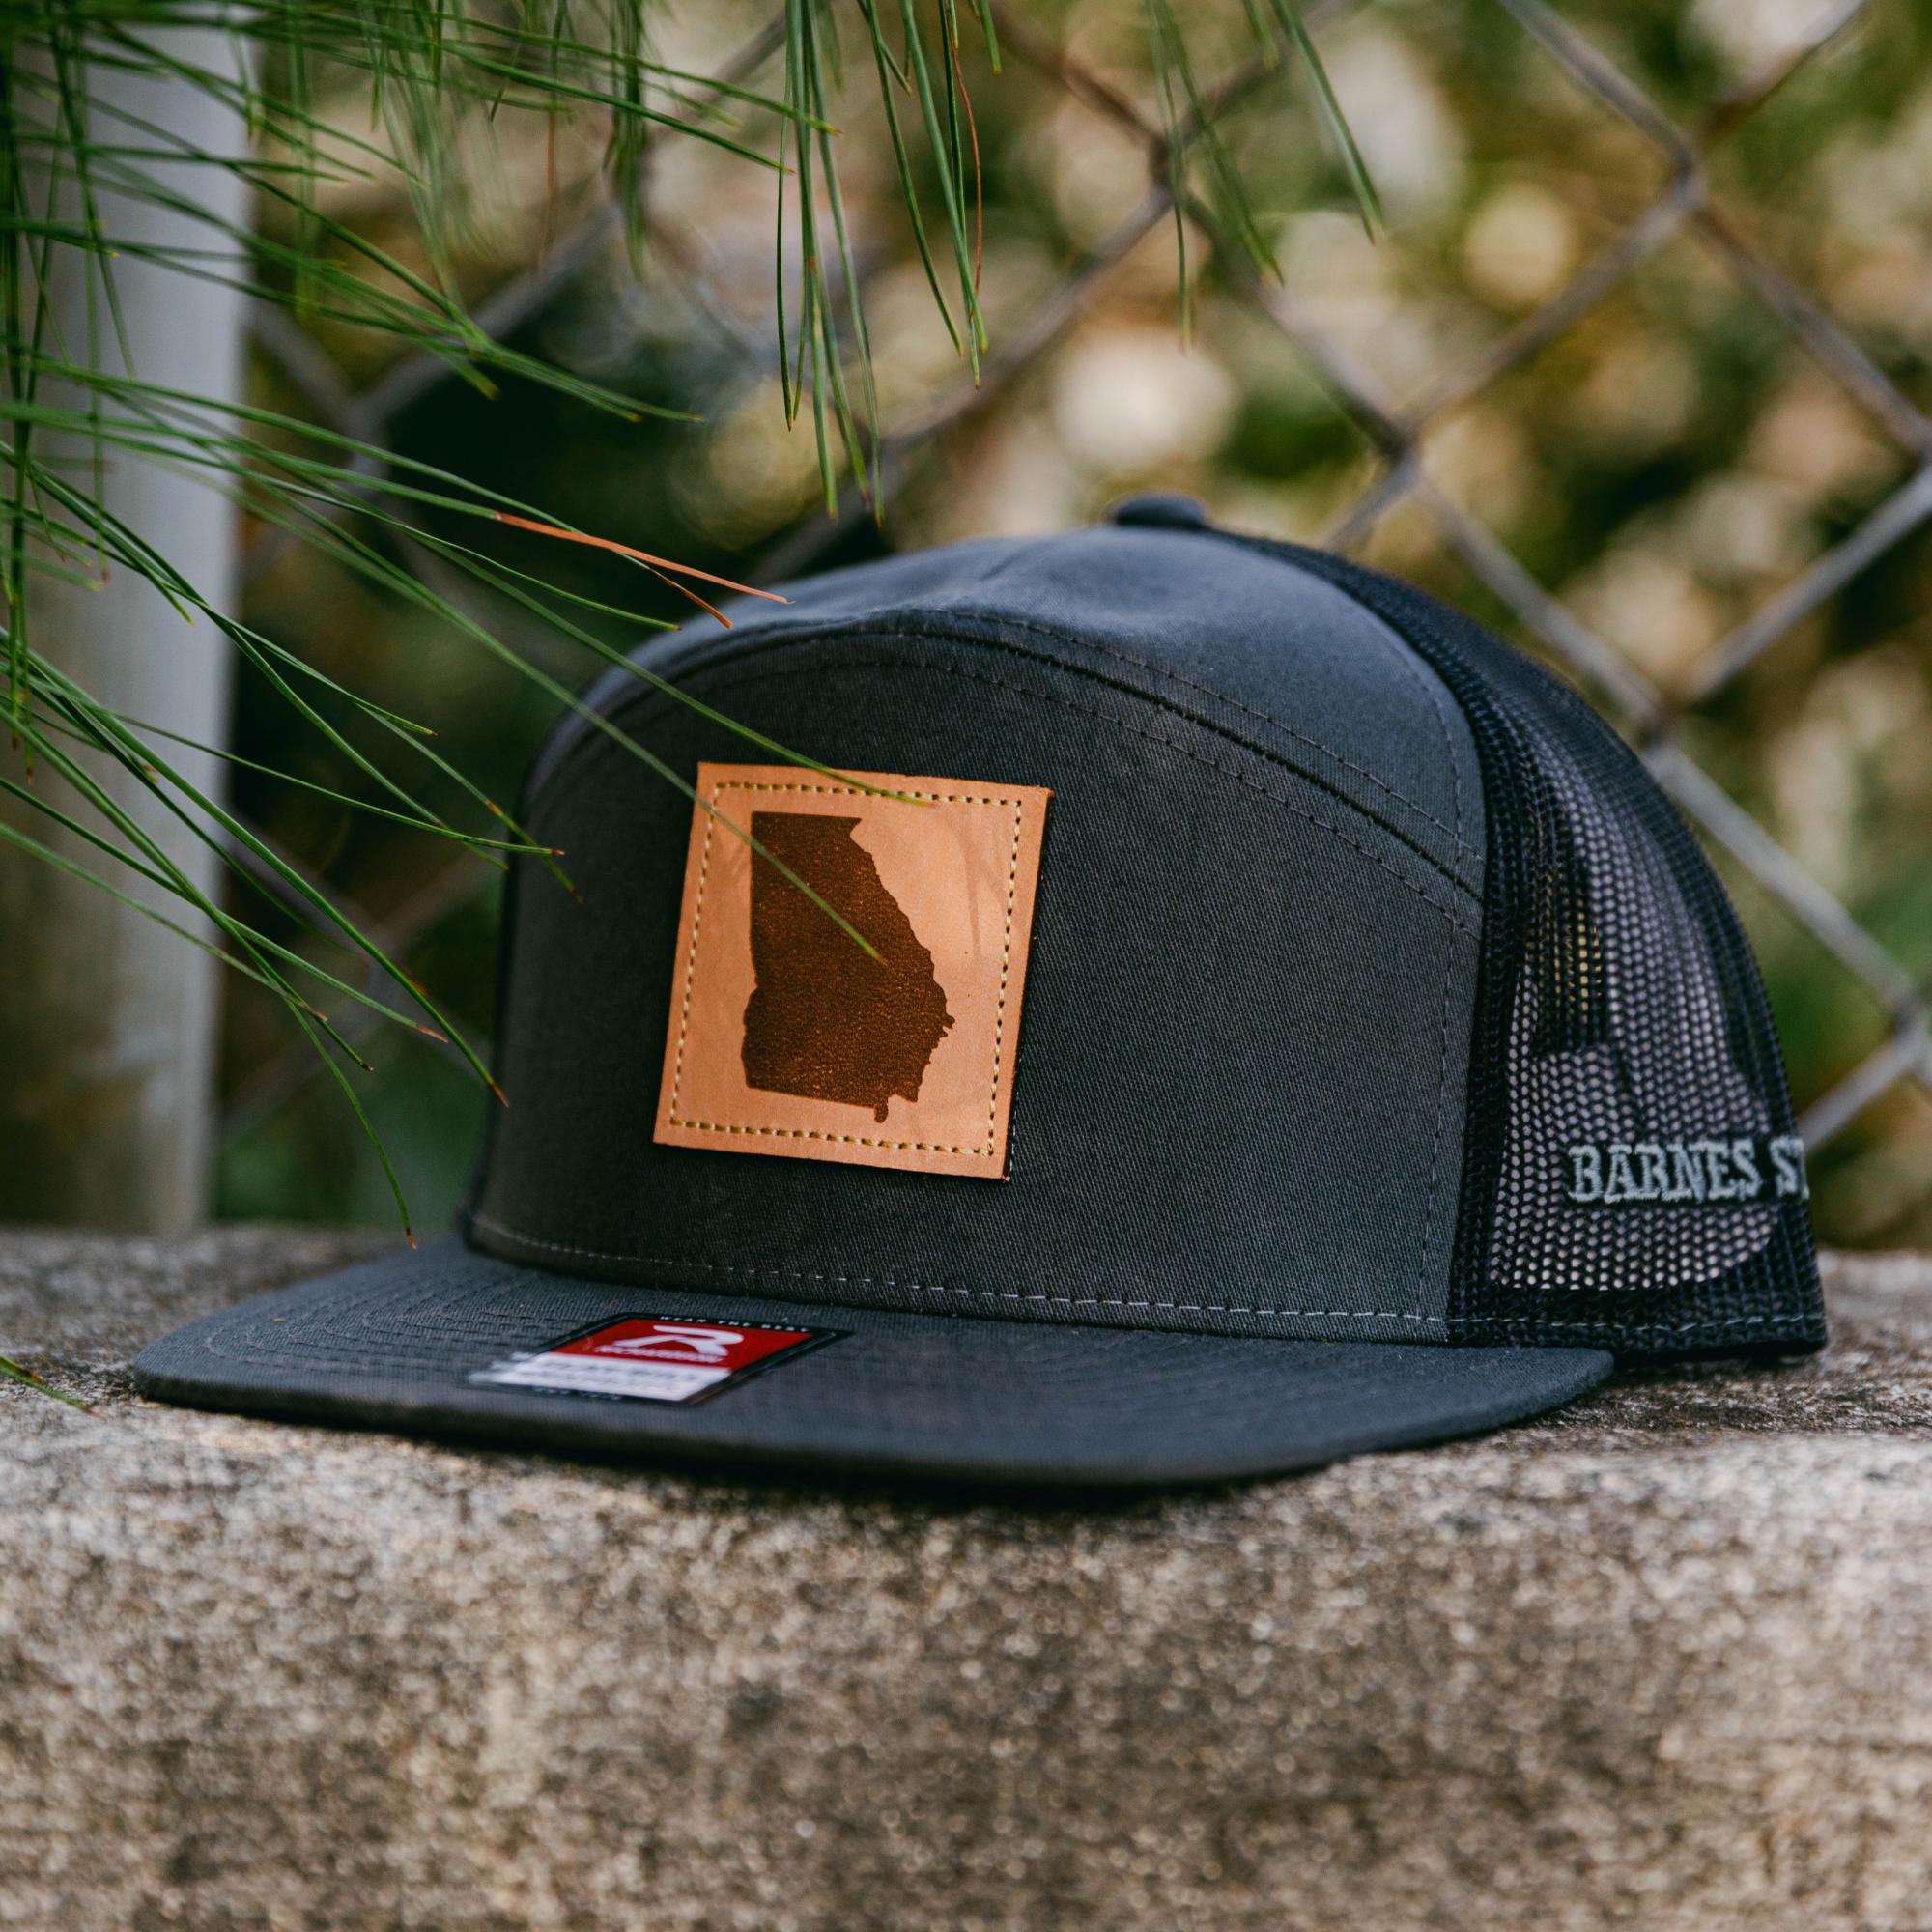 Georgia Leather Patch 7 Panel Hat - Charcoal/Black